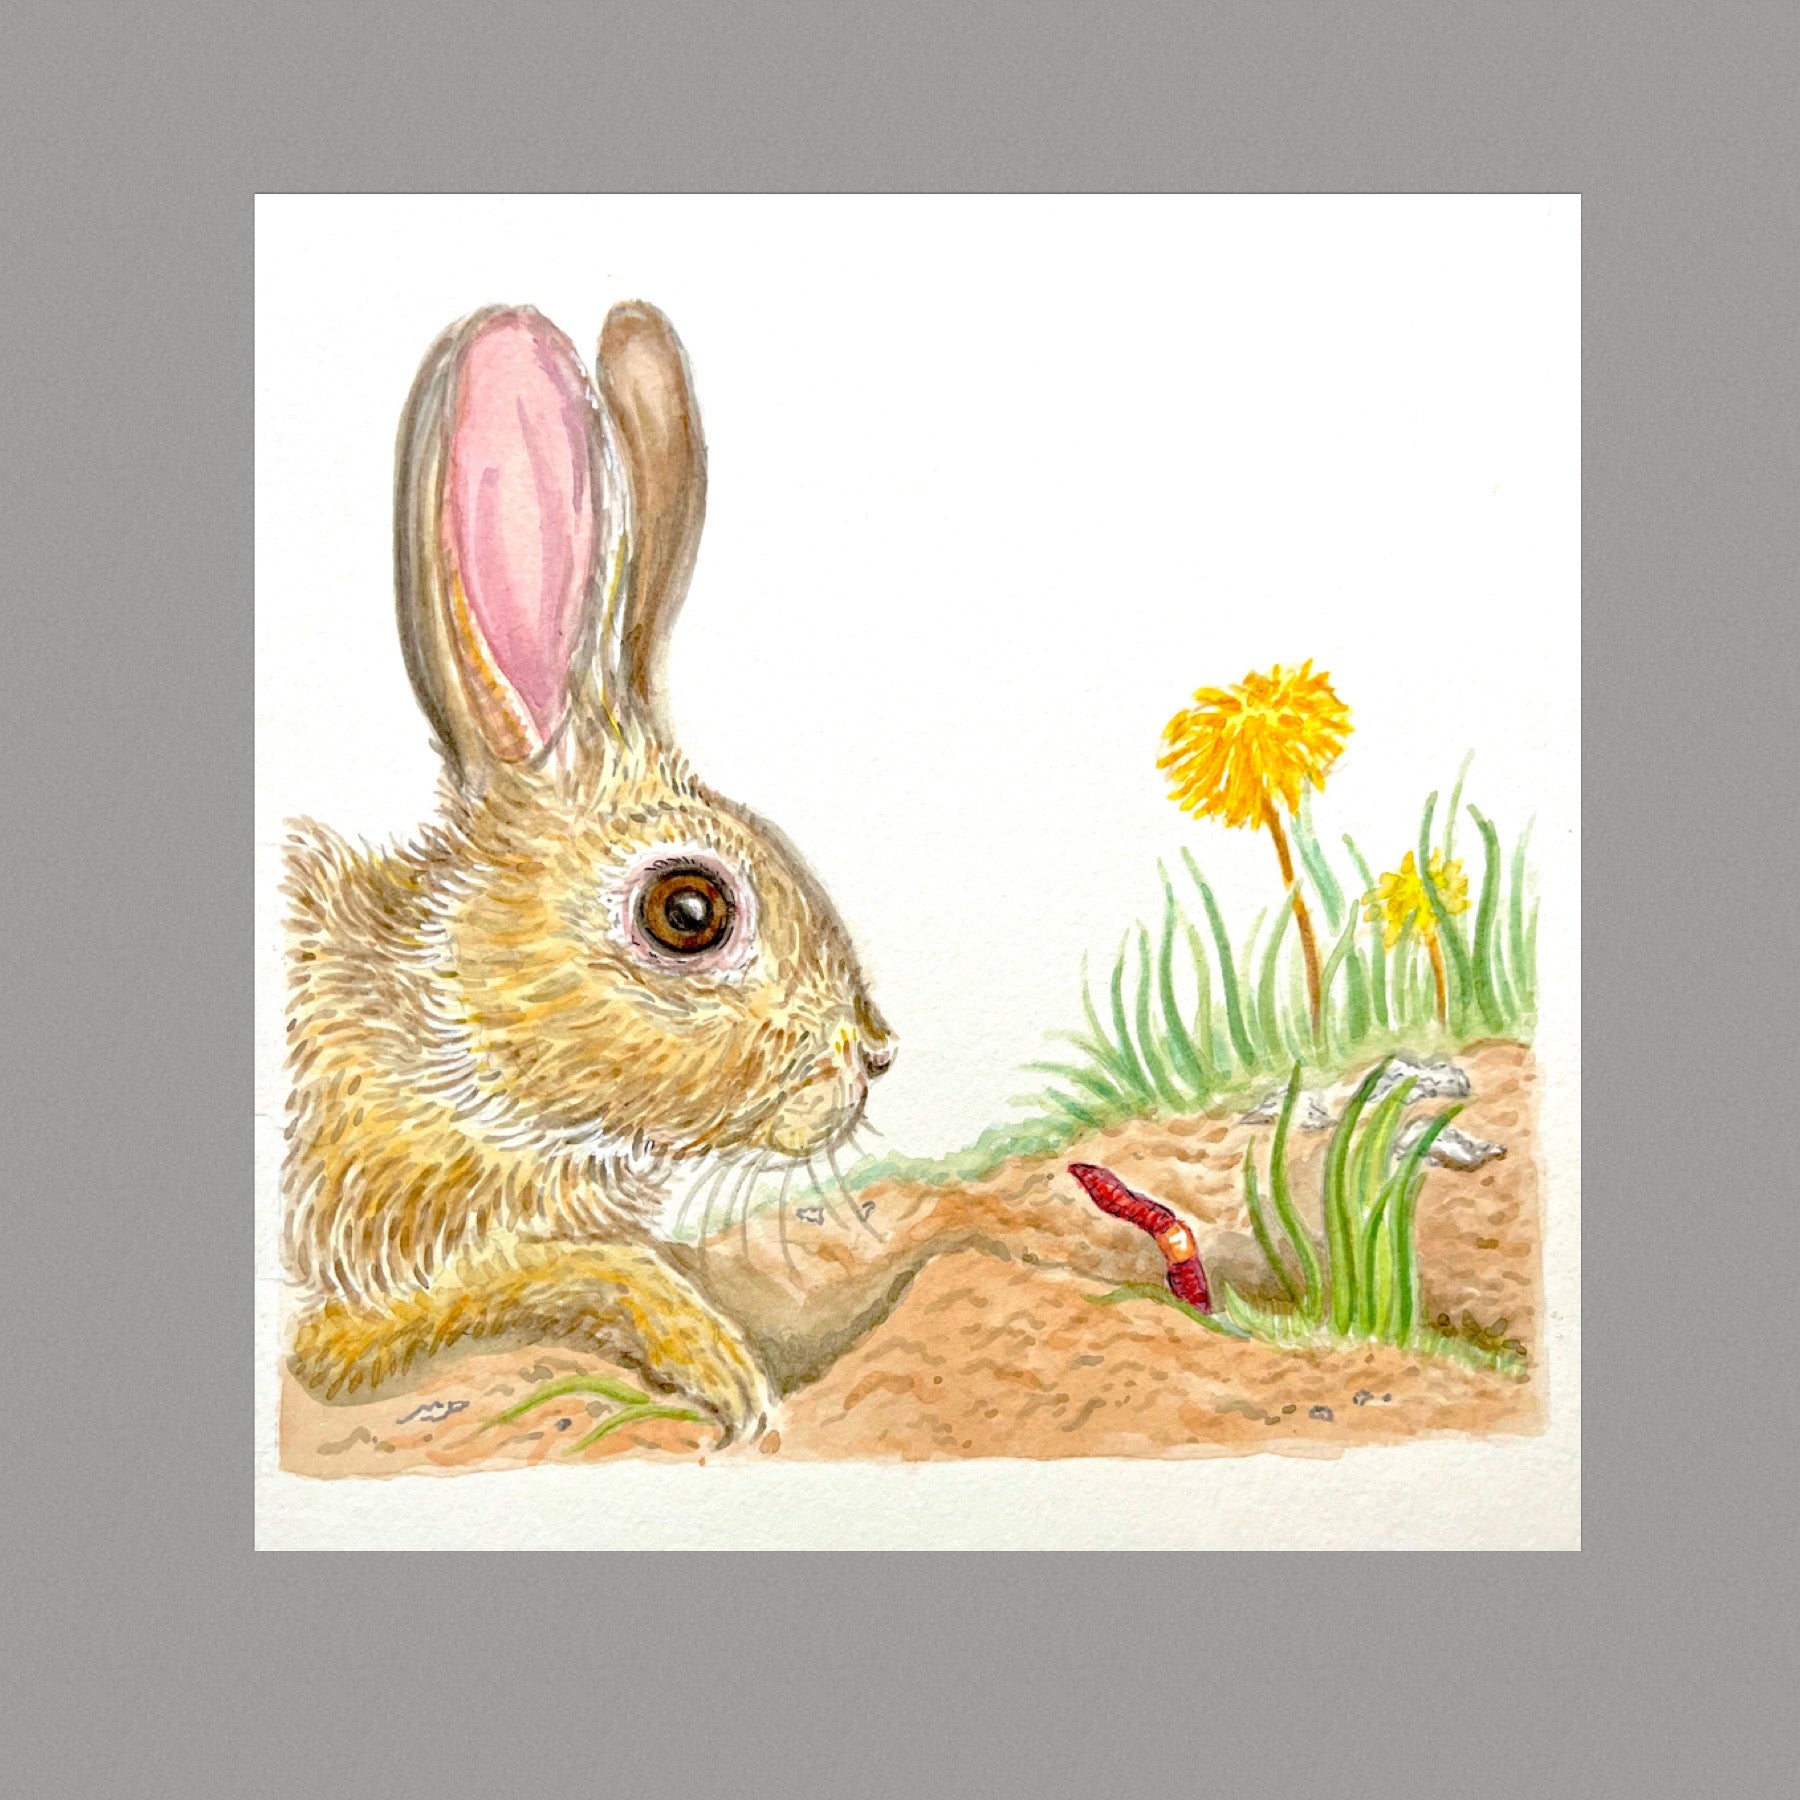 Signed "Rabbit Meets Worm" limited edition artist giclee print